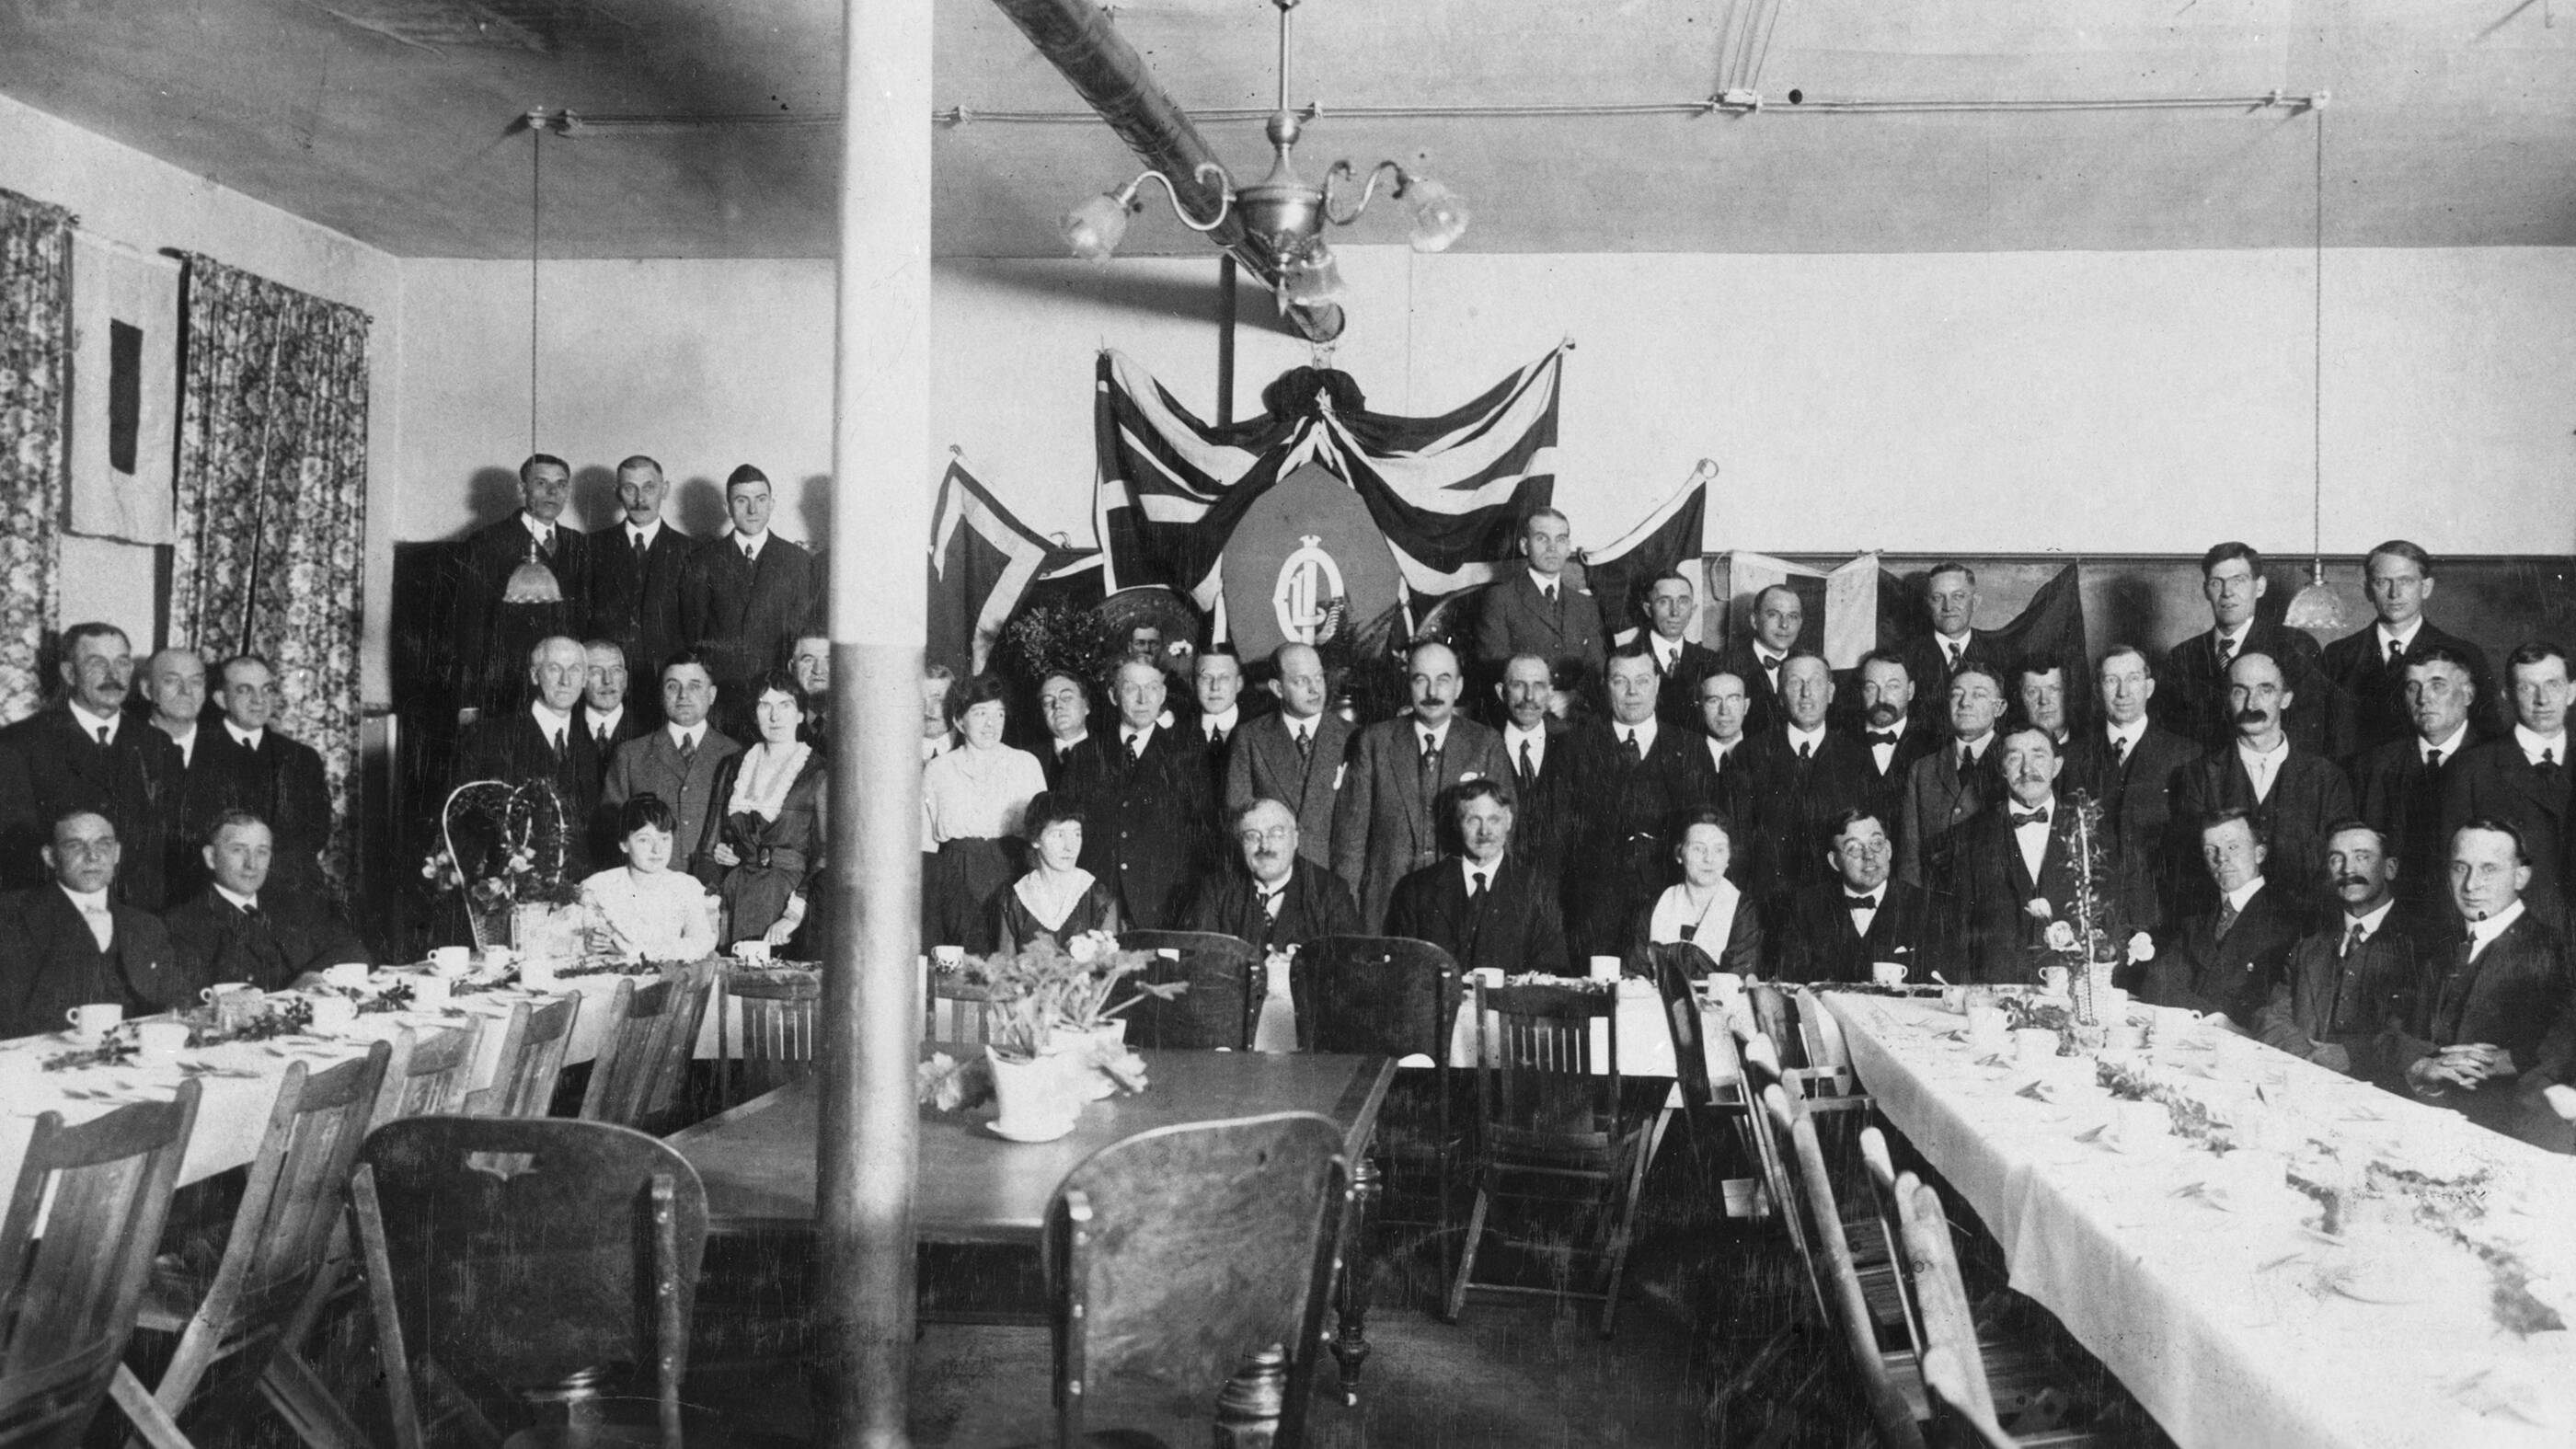 Imperial becomes the first company in Canada to adopt a system of joint industrial councils, an innovative approach to labour-management relations. Pictured: Inaugural meeting of the first Joint Industrial Council in Sarnia, Ontario.

Imperial builds a refinery at Dartmouth, Nova Scotia.